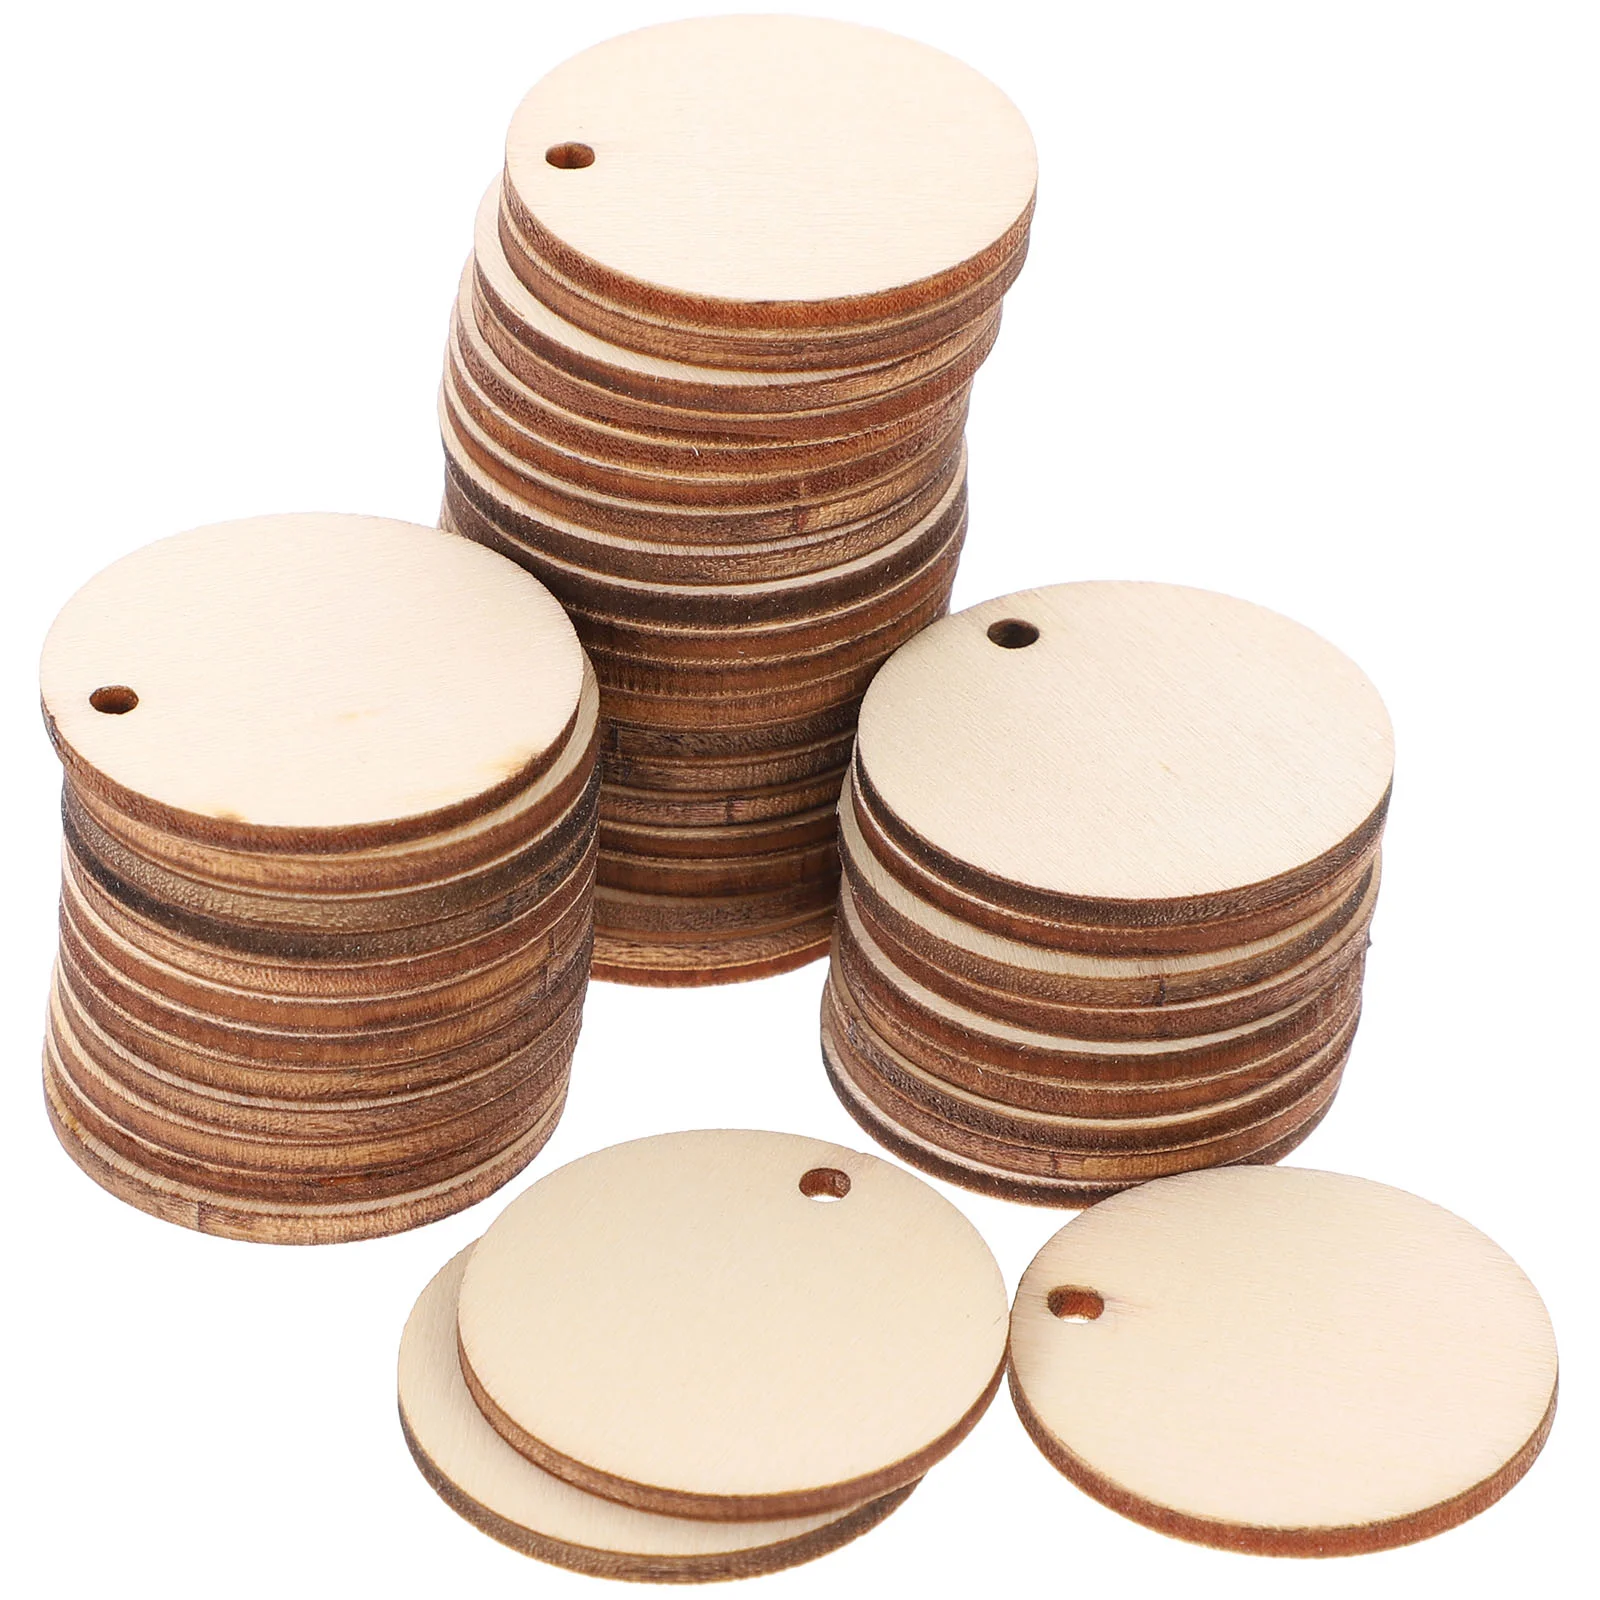 

Wood Wooden Slice Round Circles Crafts Unfinished Diy Piece Craft Tags Blank Ornaments Discs Holes Hole Slices Log Blanks